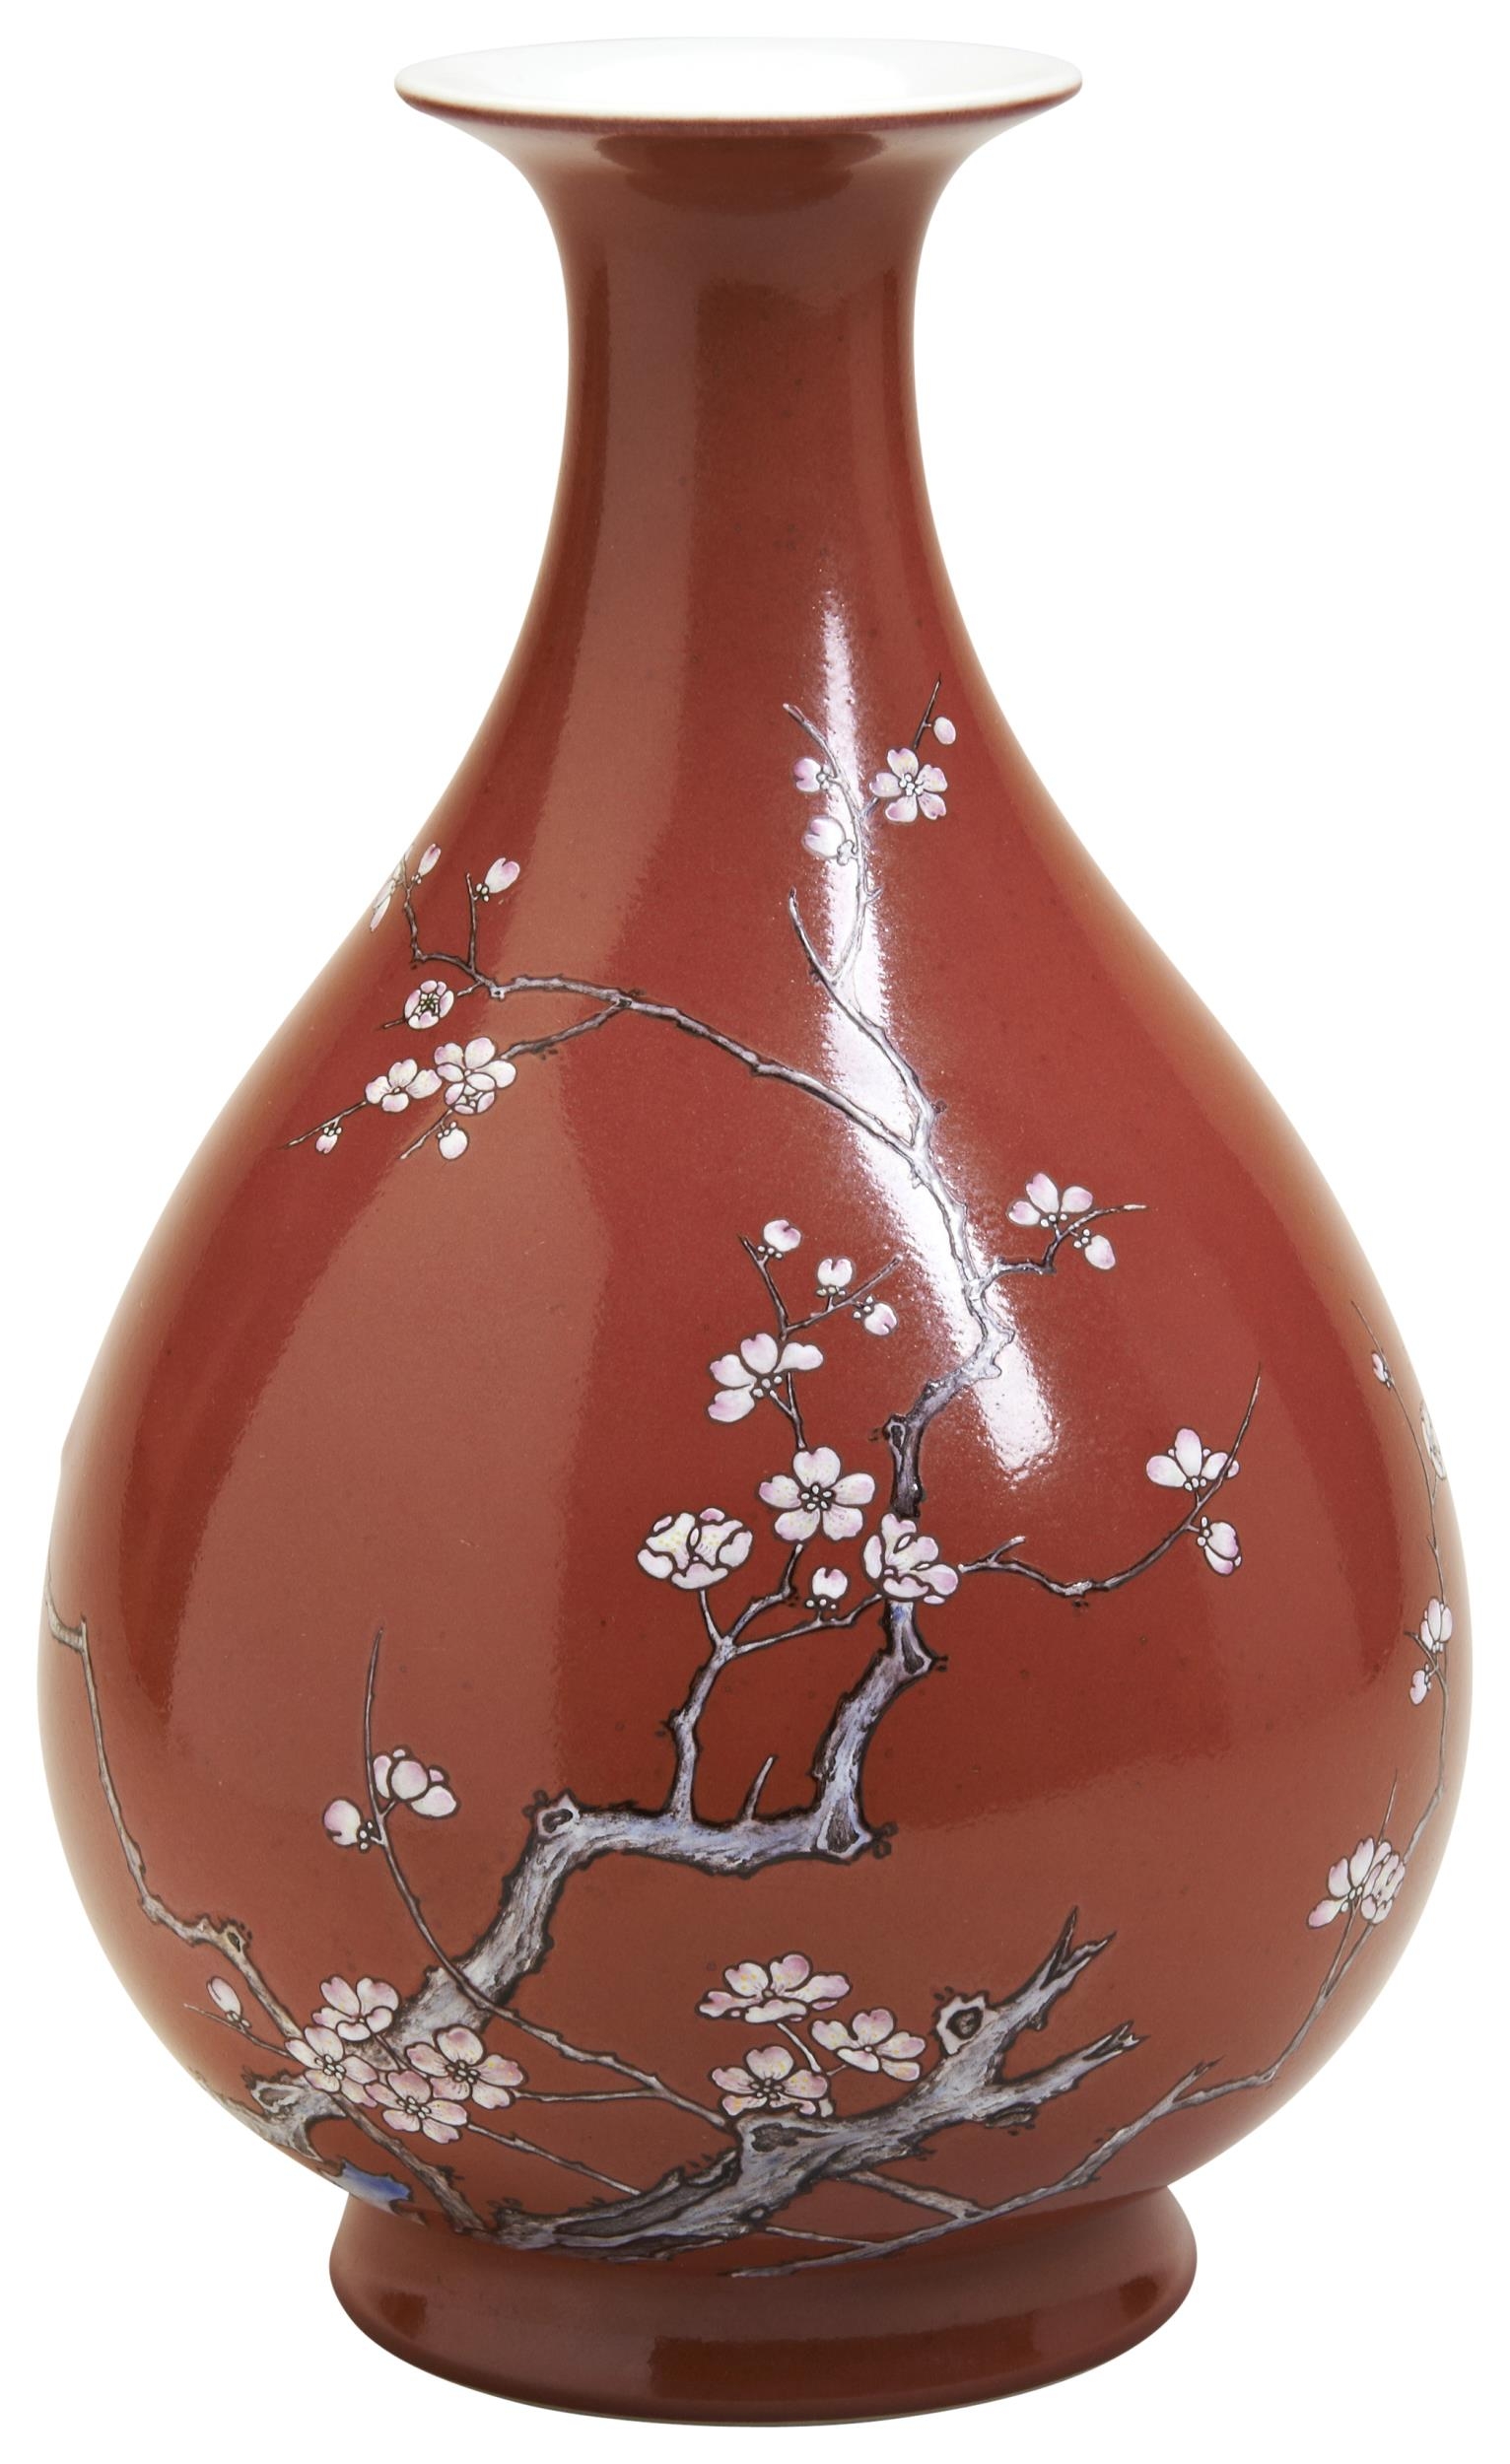 A CORAL-RED GLAZED ENAMELLED VASE, YUHUCHUNPING QIANLONG SEAL MARK IN BLUE, 19TH / 20TH CENTURY